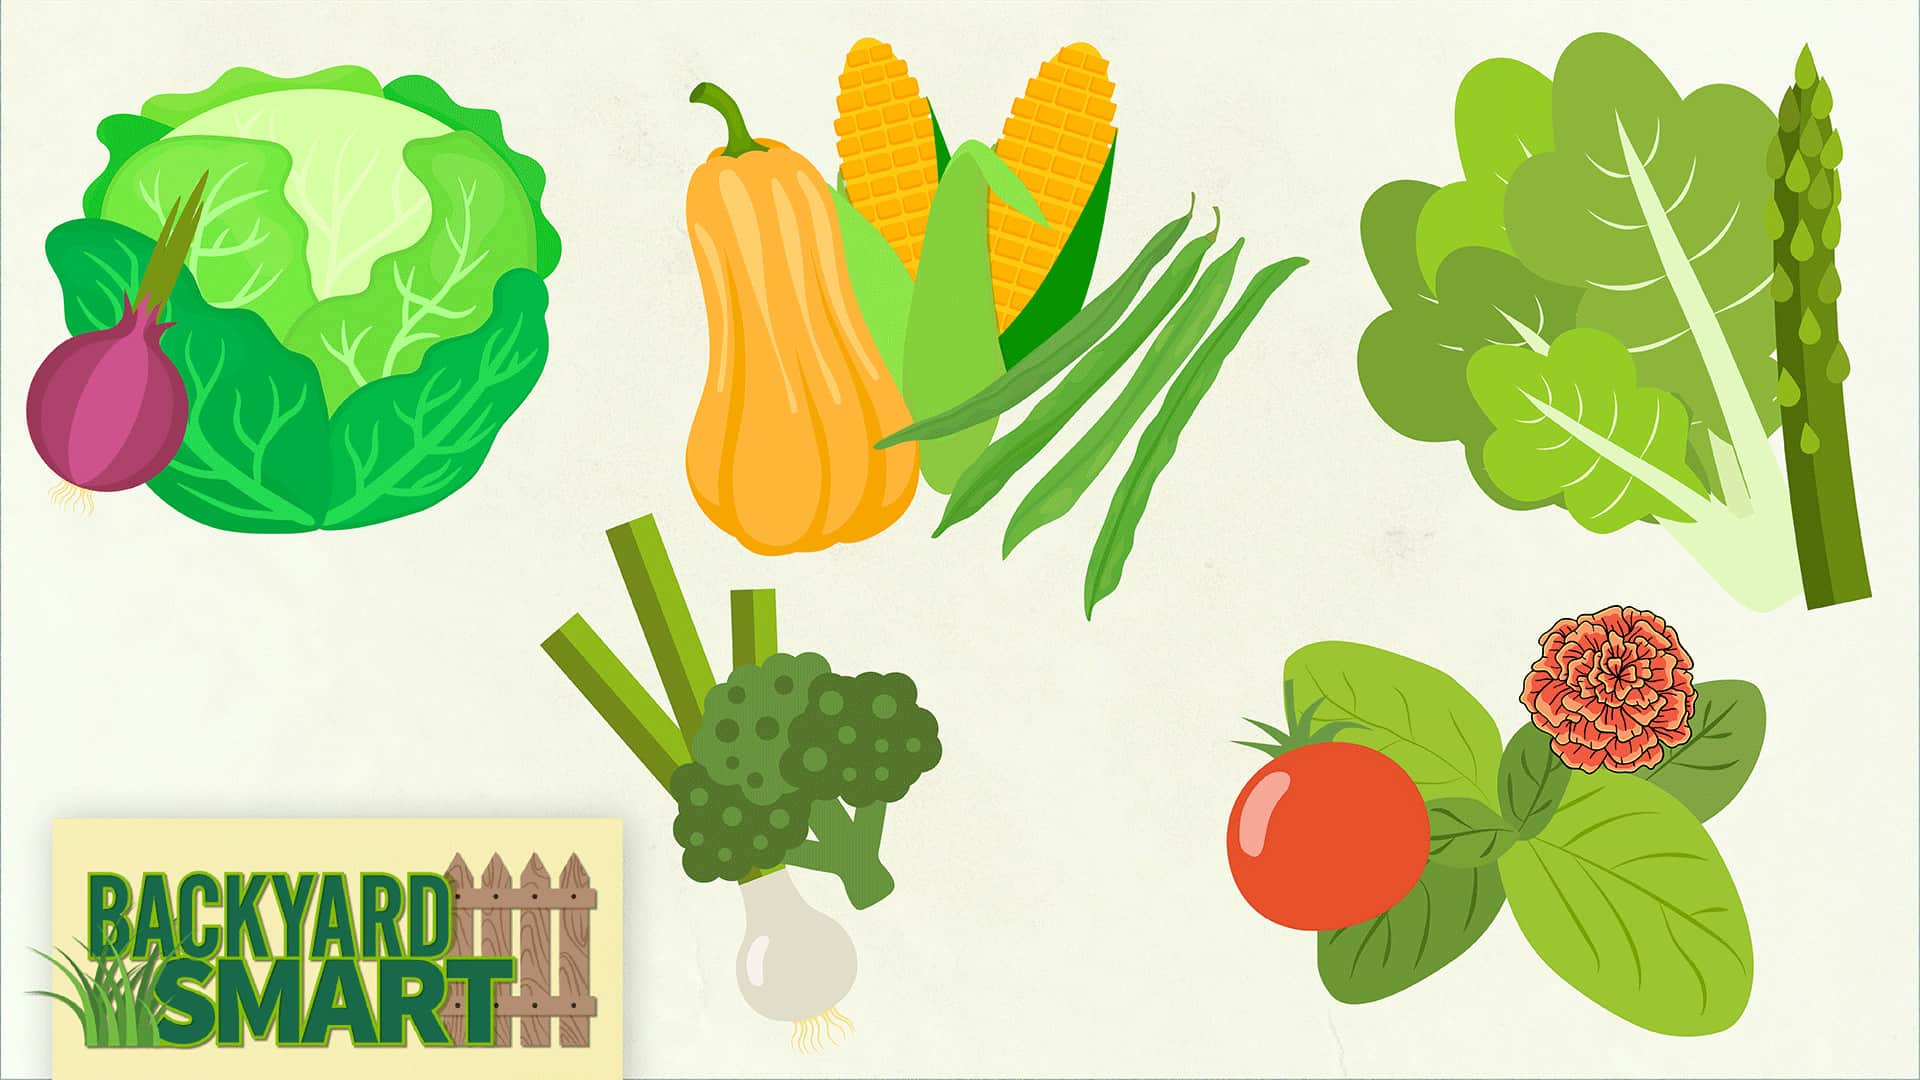 Companion Planting with Vegetables